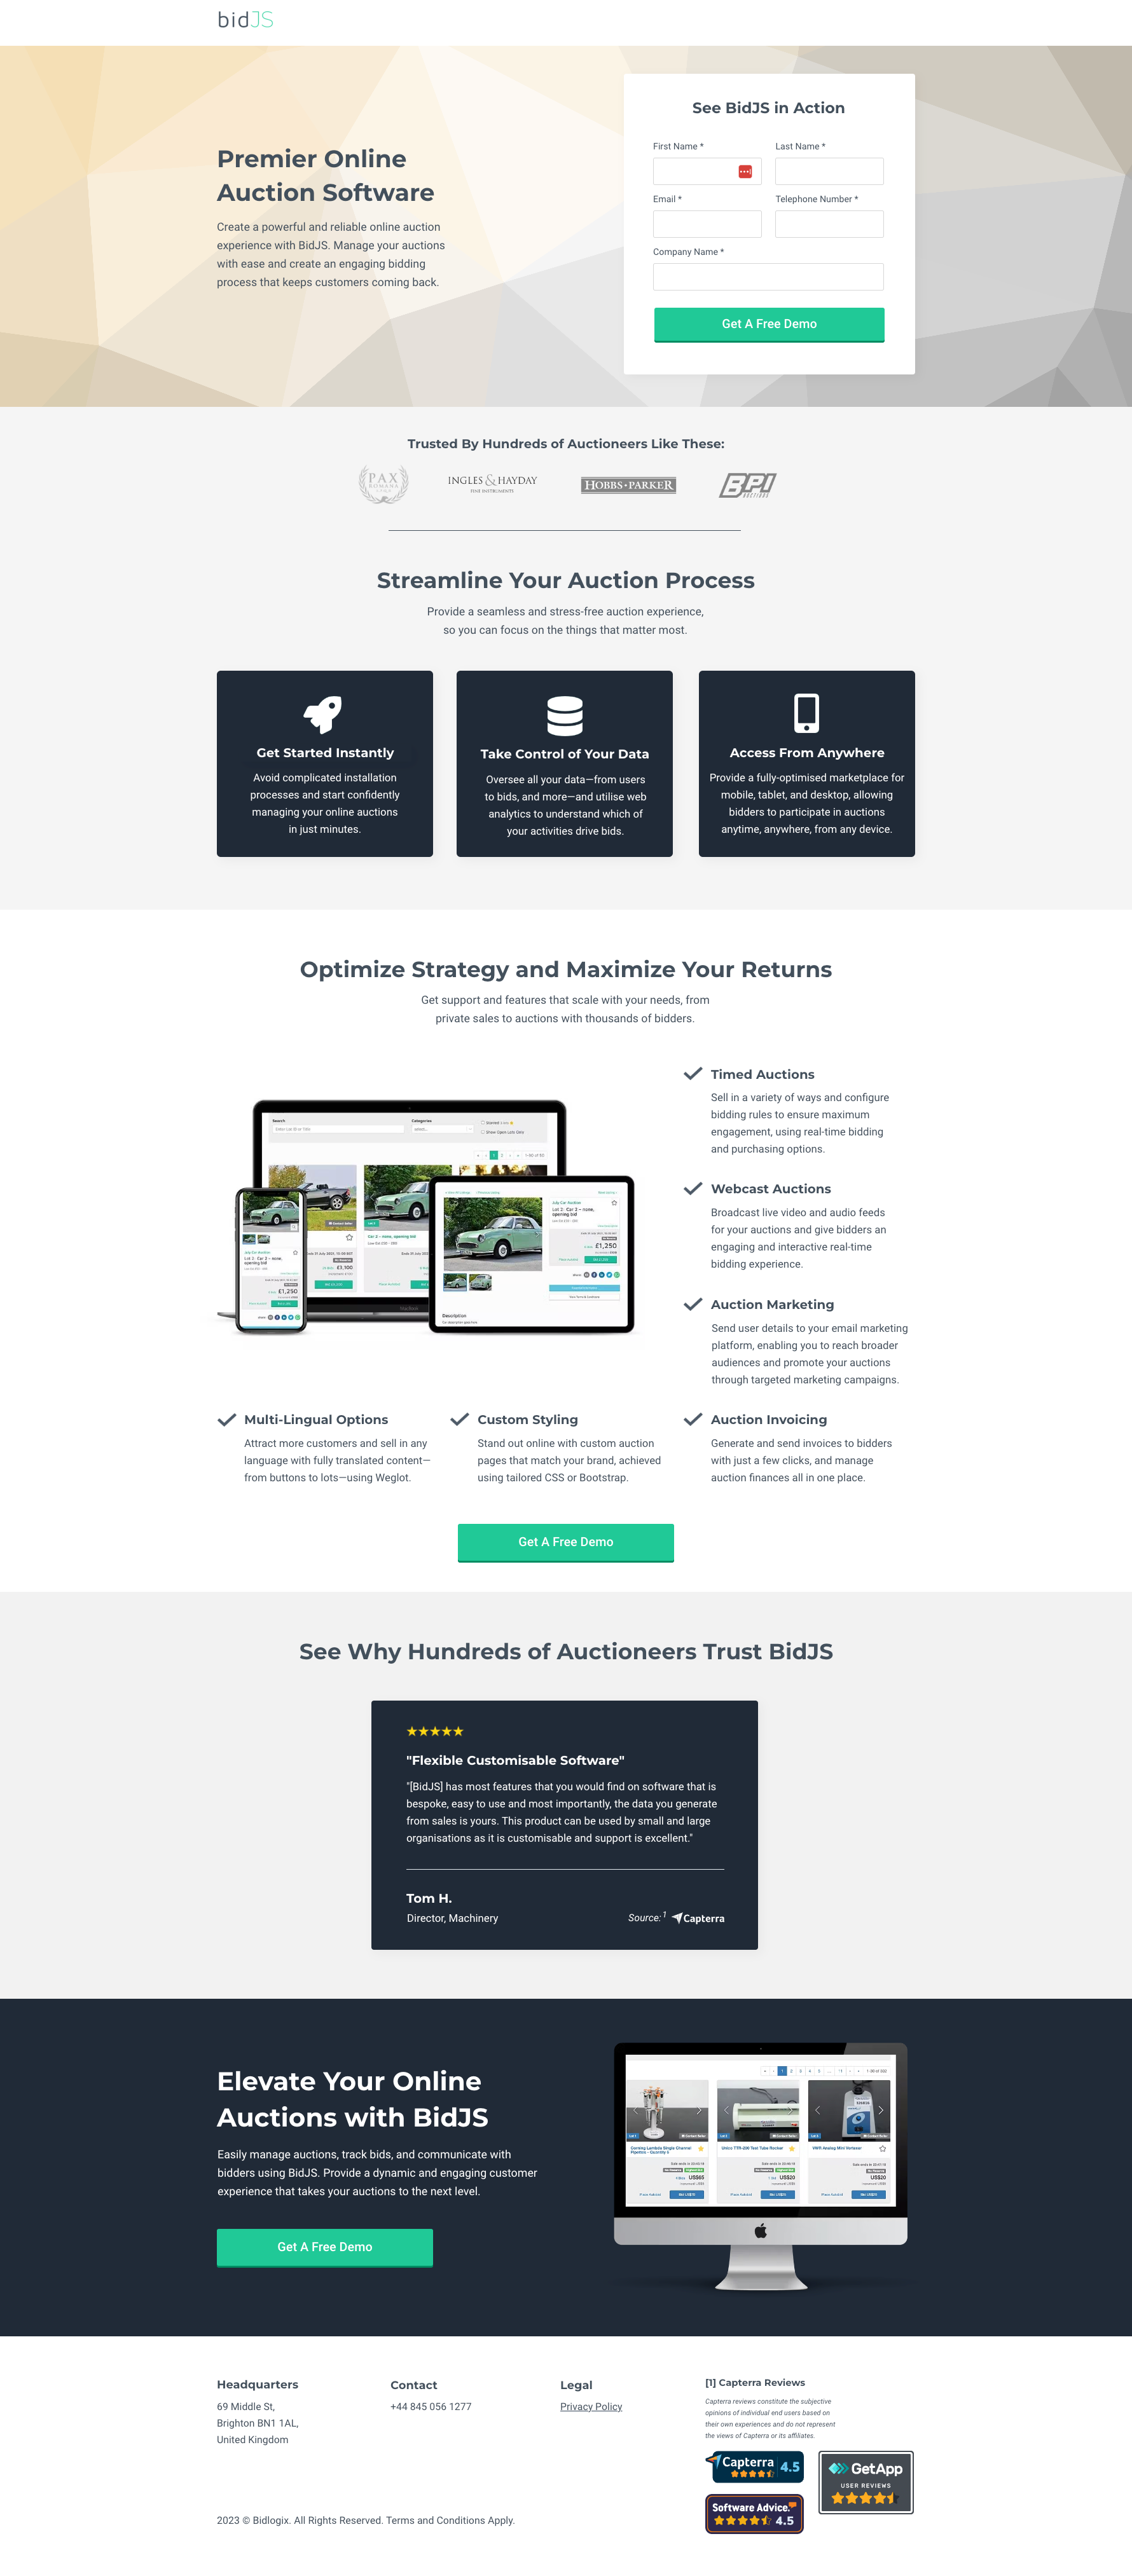 A complete screenshot of the ProjectTeam, Inc. landing page, showcasing layout and design